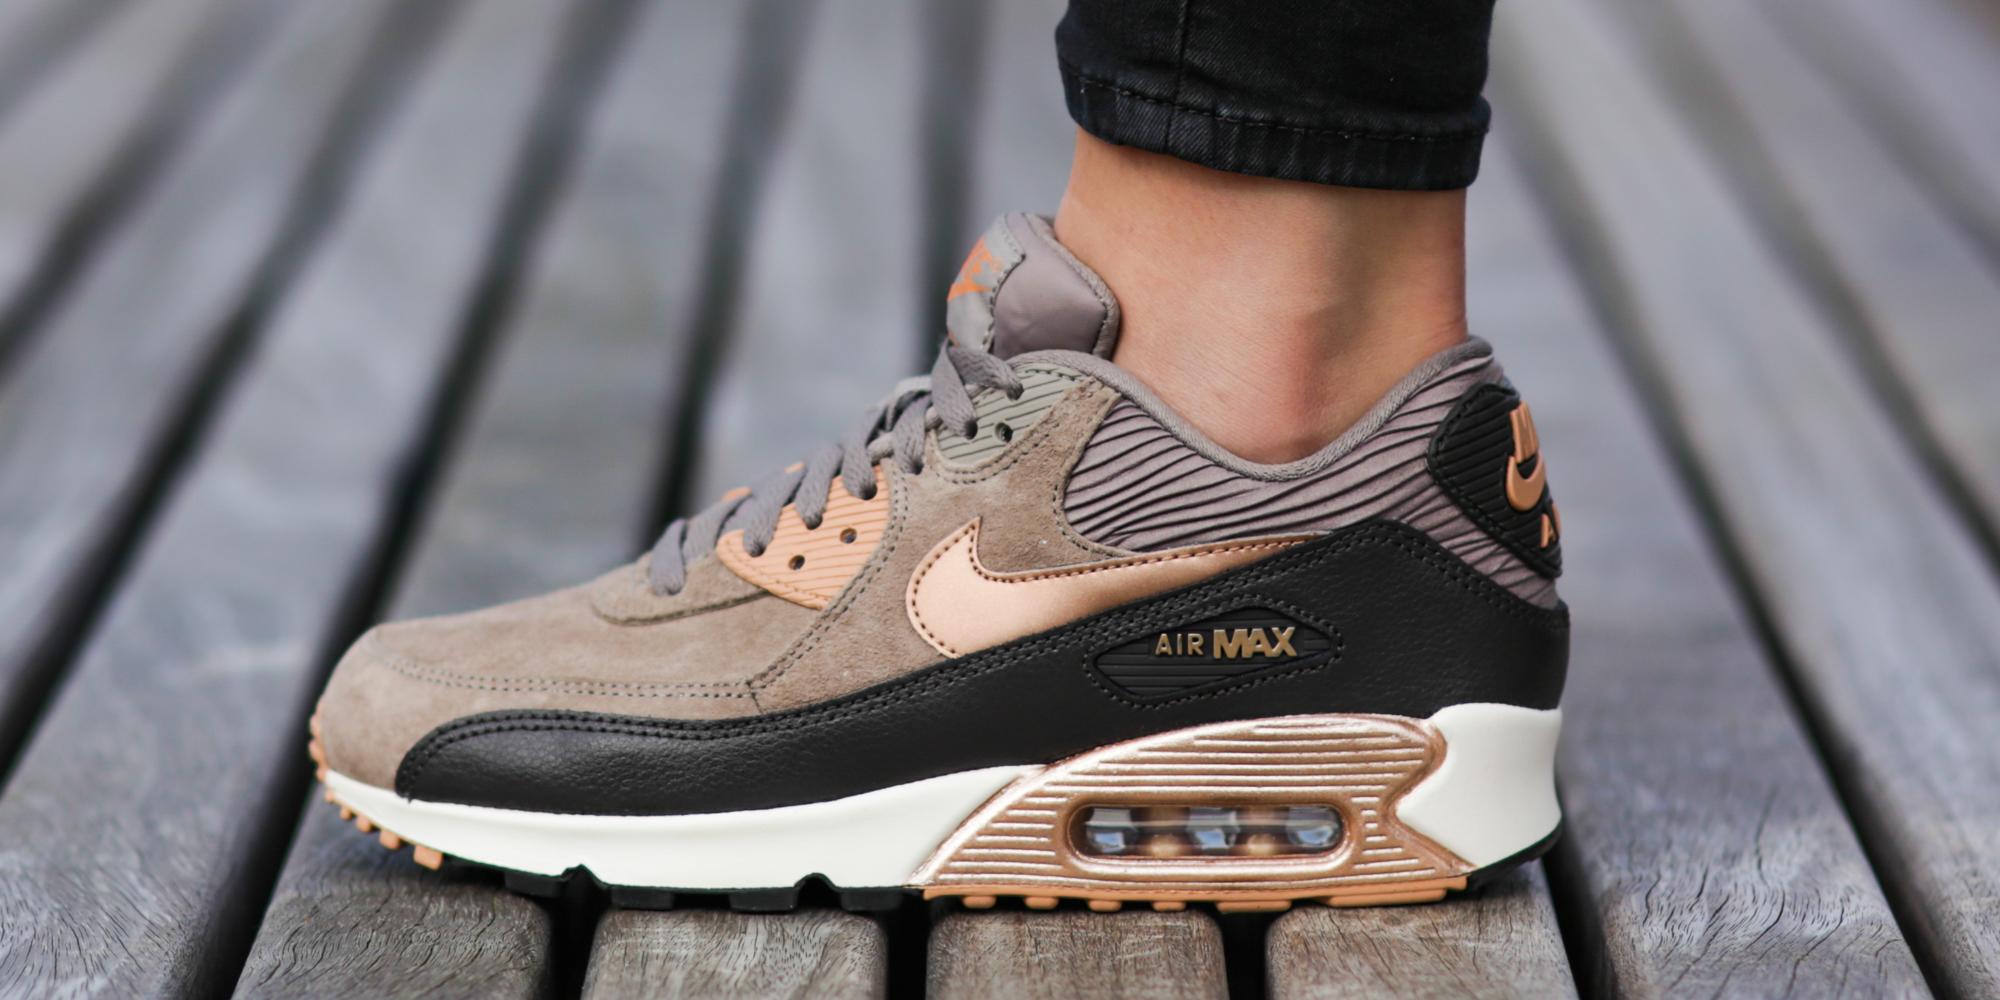 Foot Locker EU on Twitter: "The women's #Nike Air Max 90 Leather in Iron Metallic and Bronze Friday 9am CET in store http://t.co/aA3P34eo4V" / Twitter